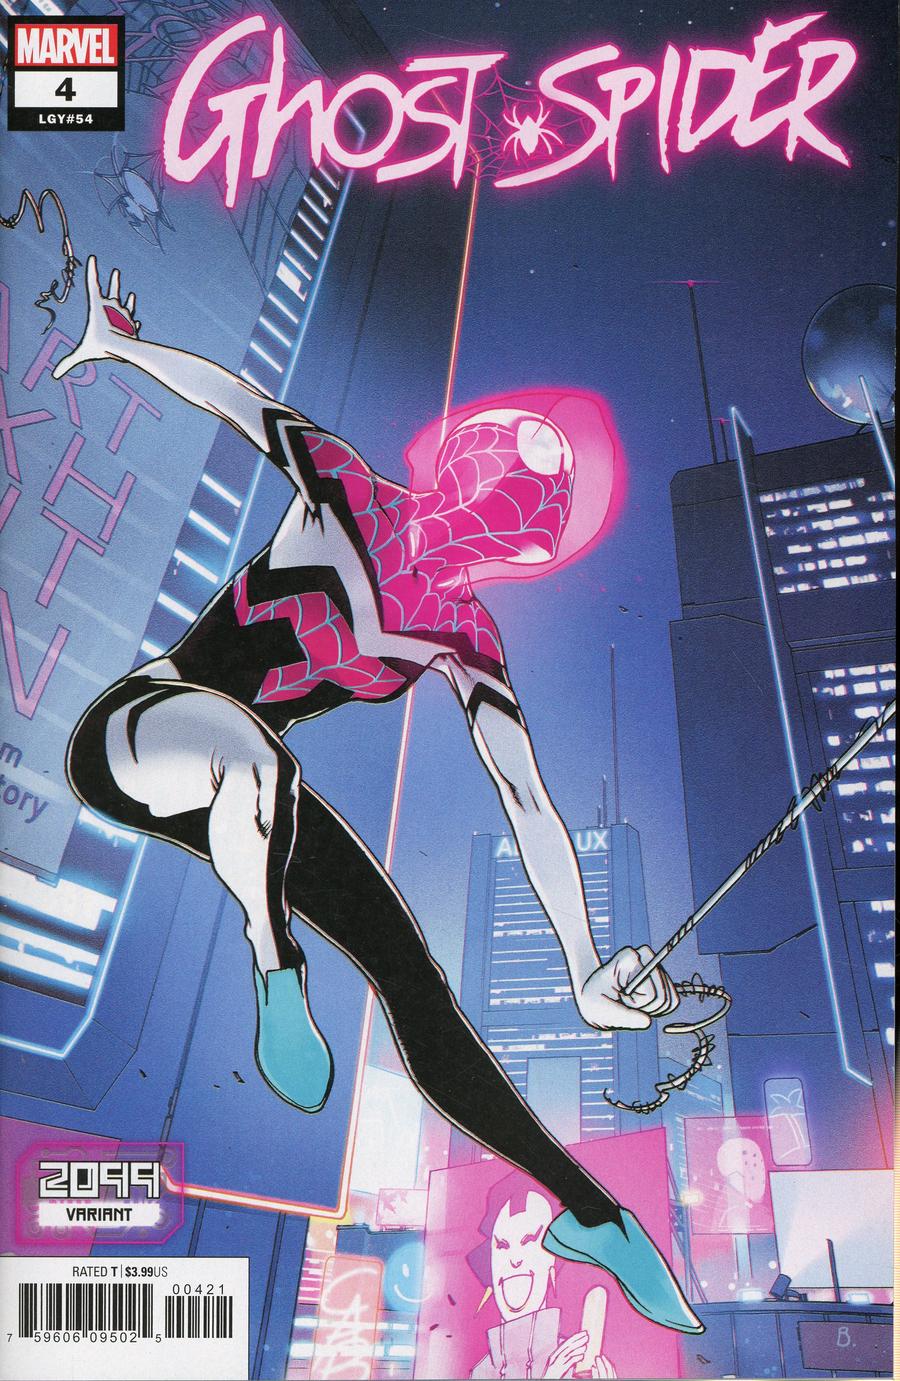 SPIDER-GWEN GHOST SPIDER #4 BENGAL COVER A MARVEL 2019 STOCK IMAGE